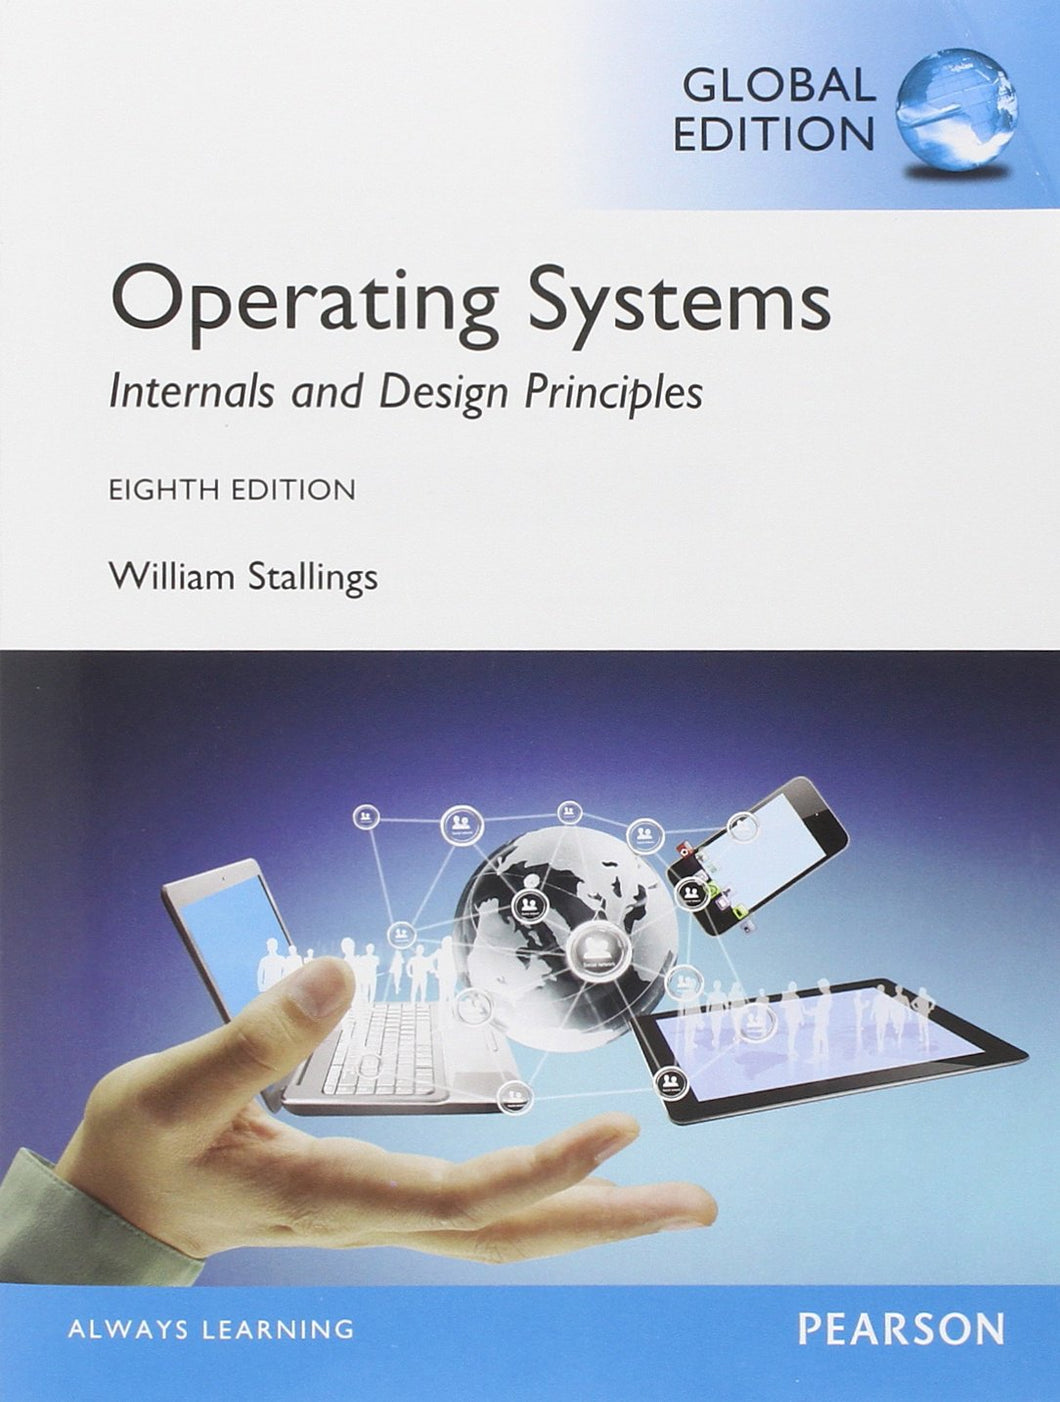 Operating Systems: Internals and Design Principles, Global Edition [Paperback] 8e by William Stallings